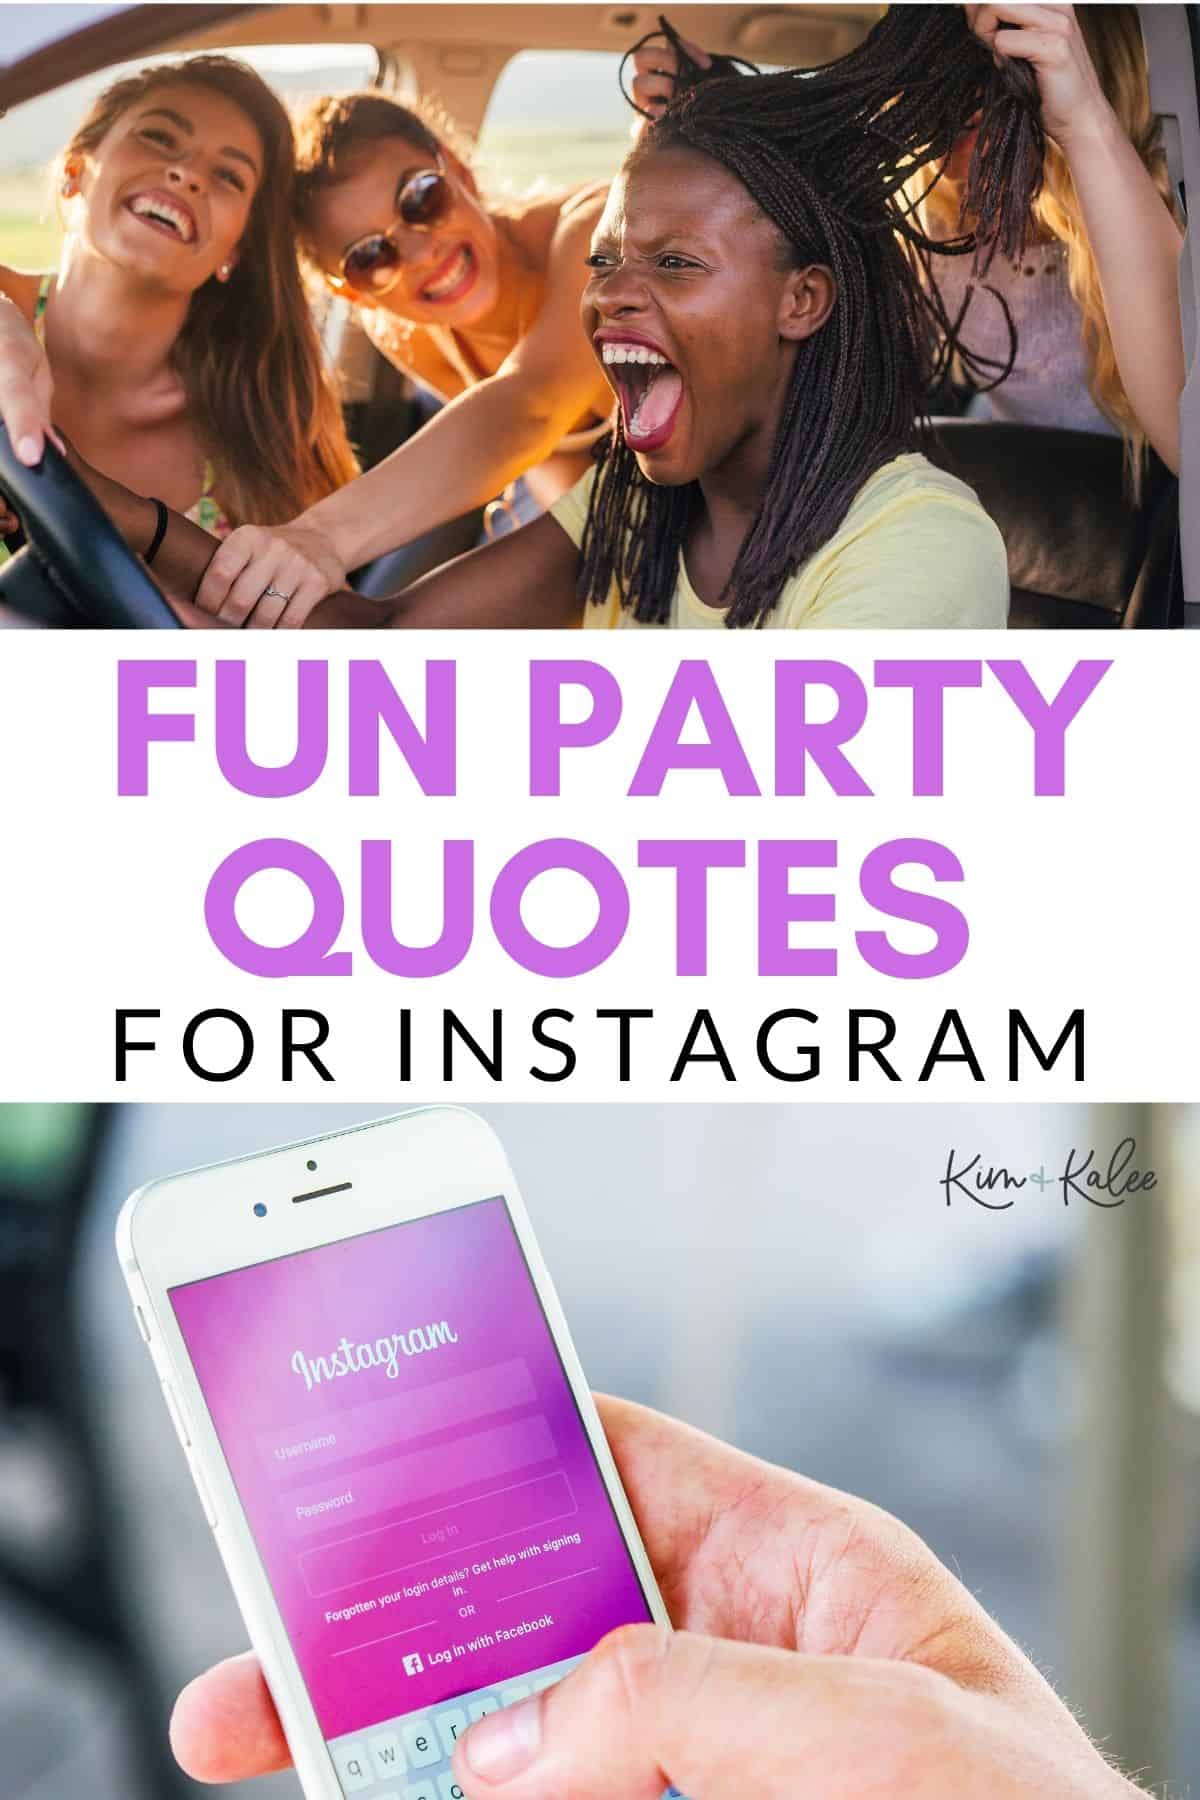 collage of a phone with instagram on it and a group of girls having fun - text overlay in the middle reads "party quotes for Instagram"